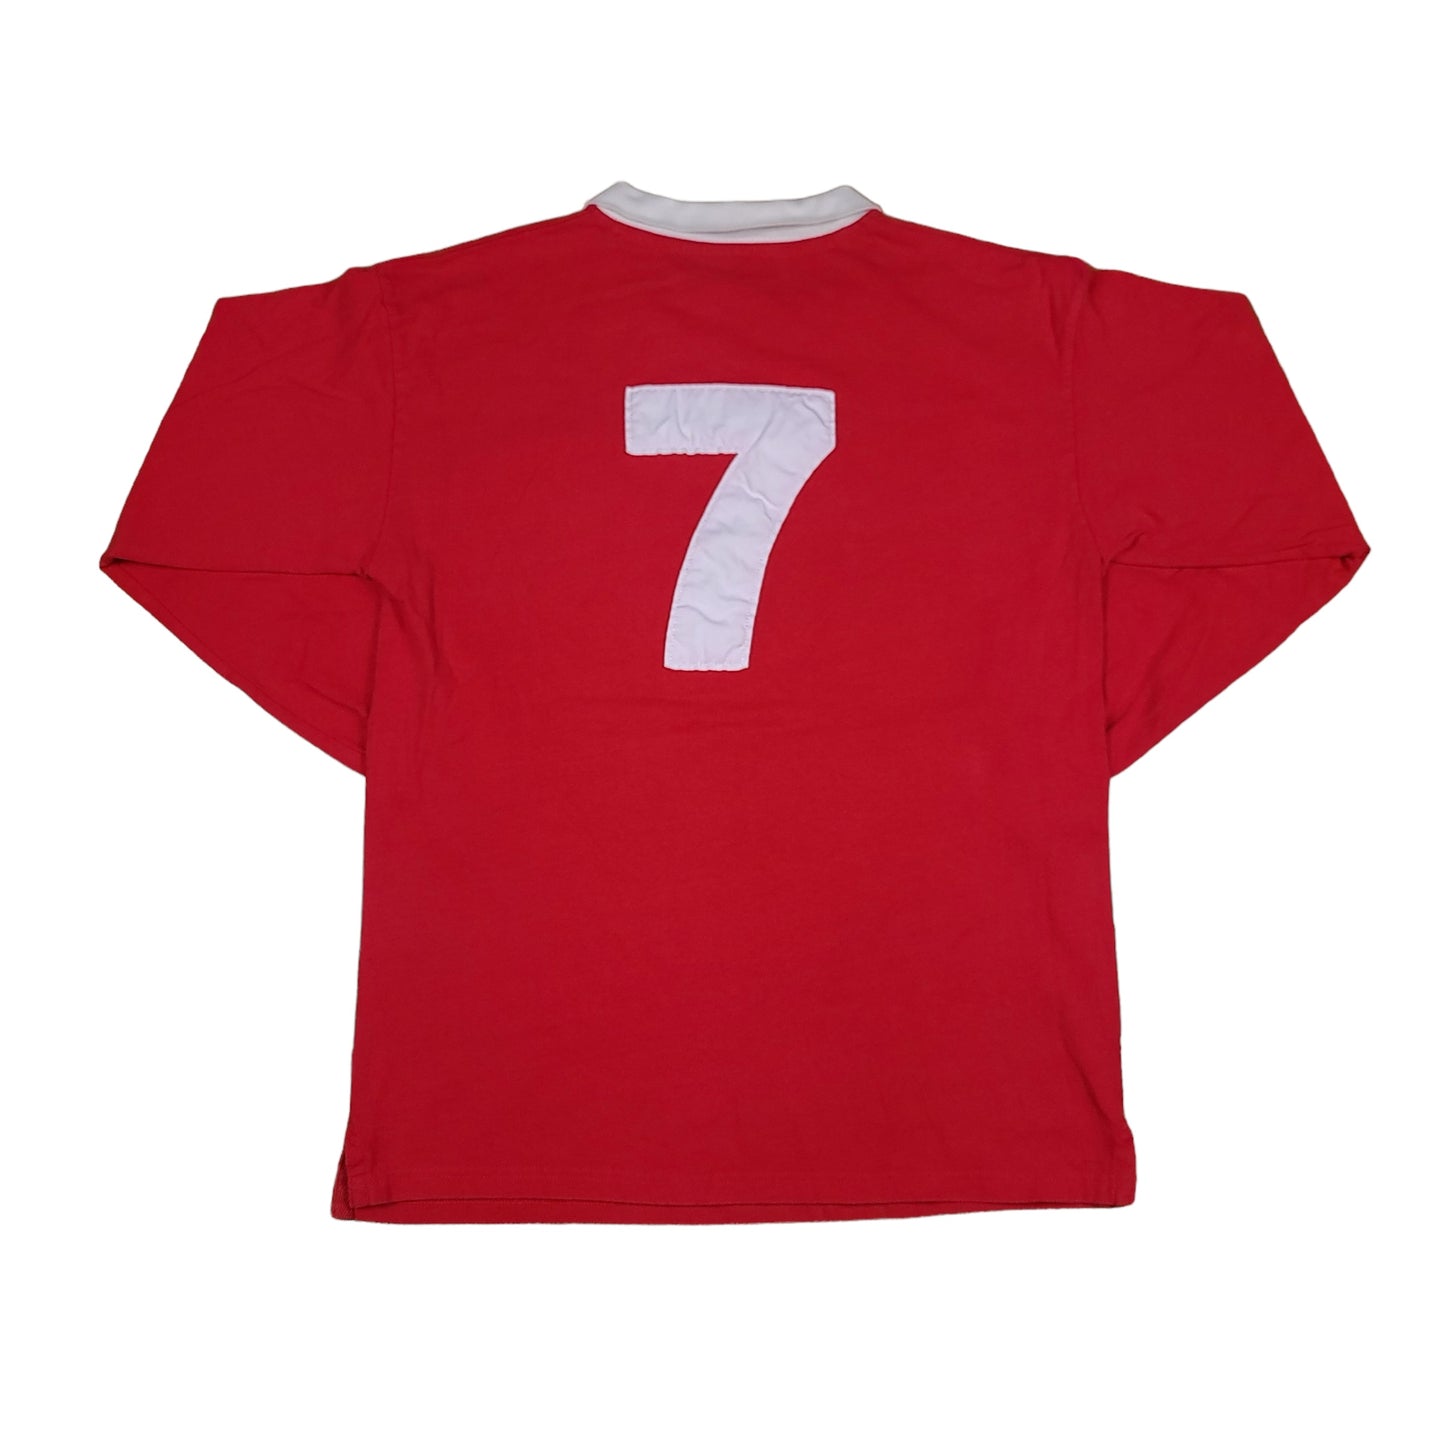 Manchester United Football Red Long Sleeve Polo